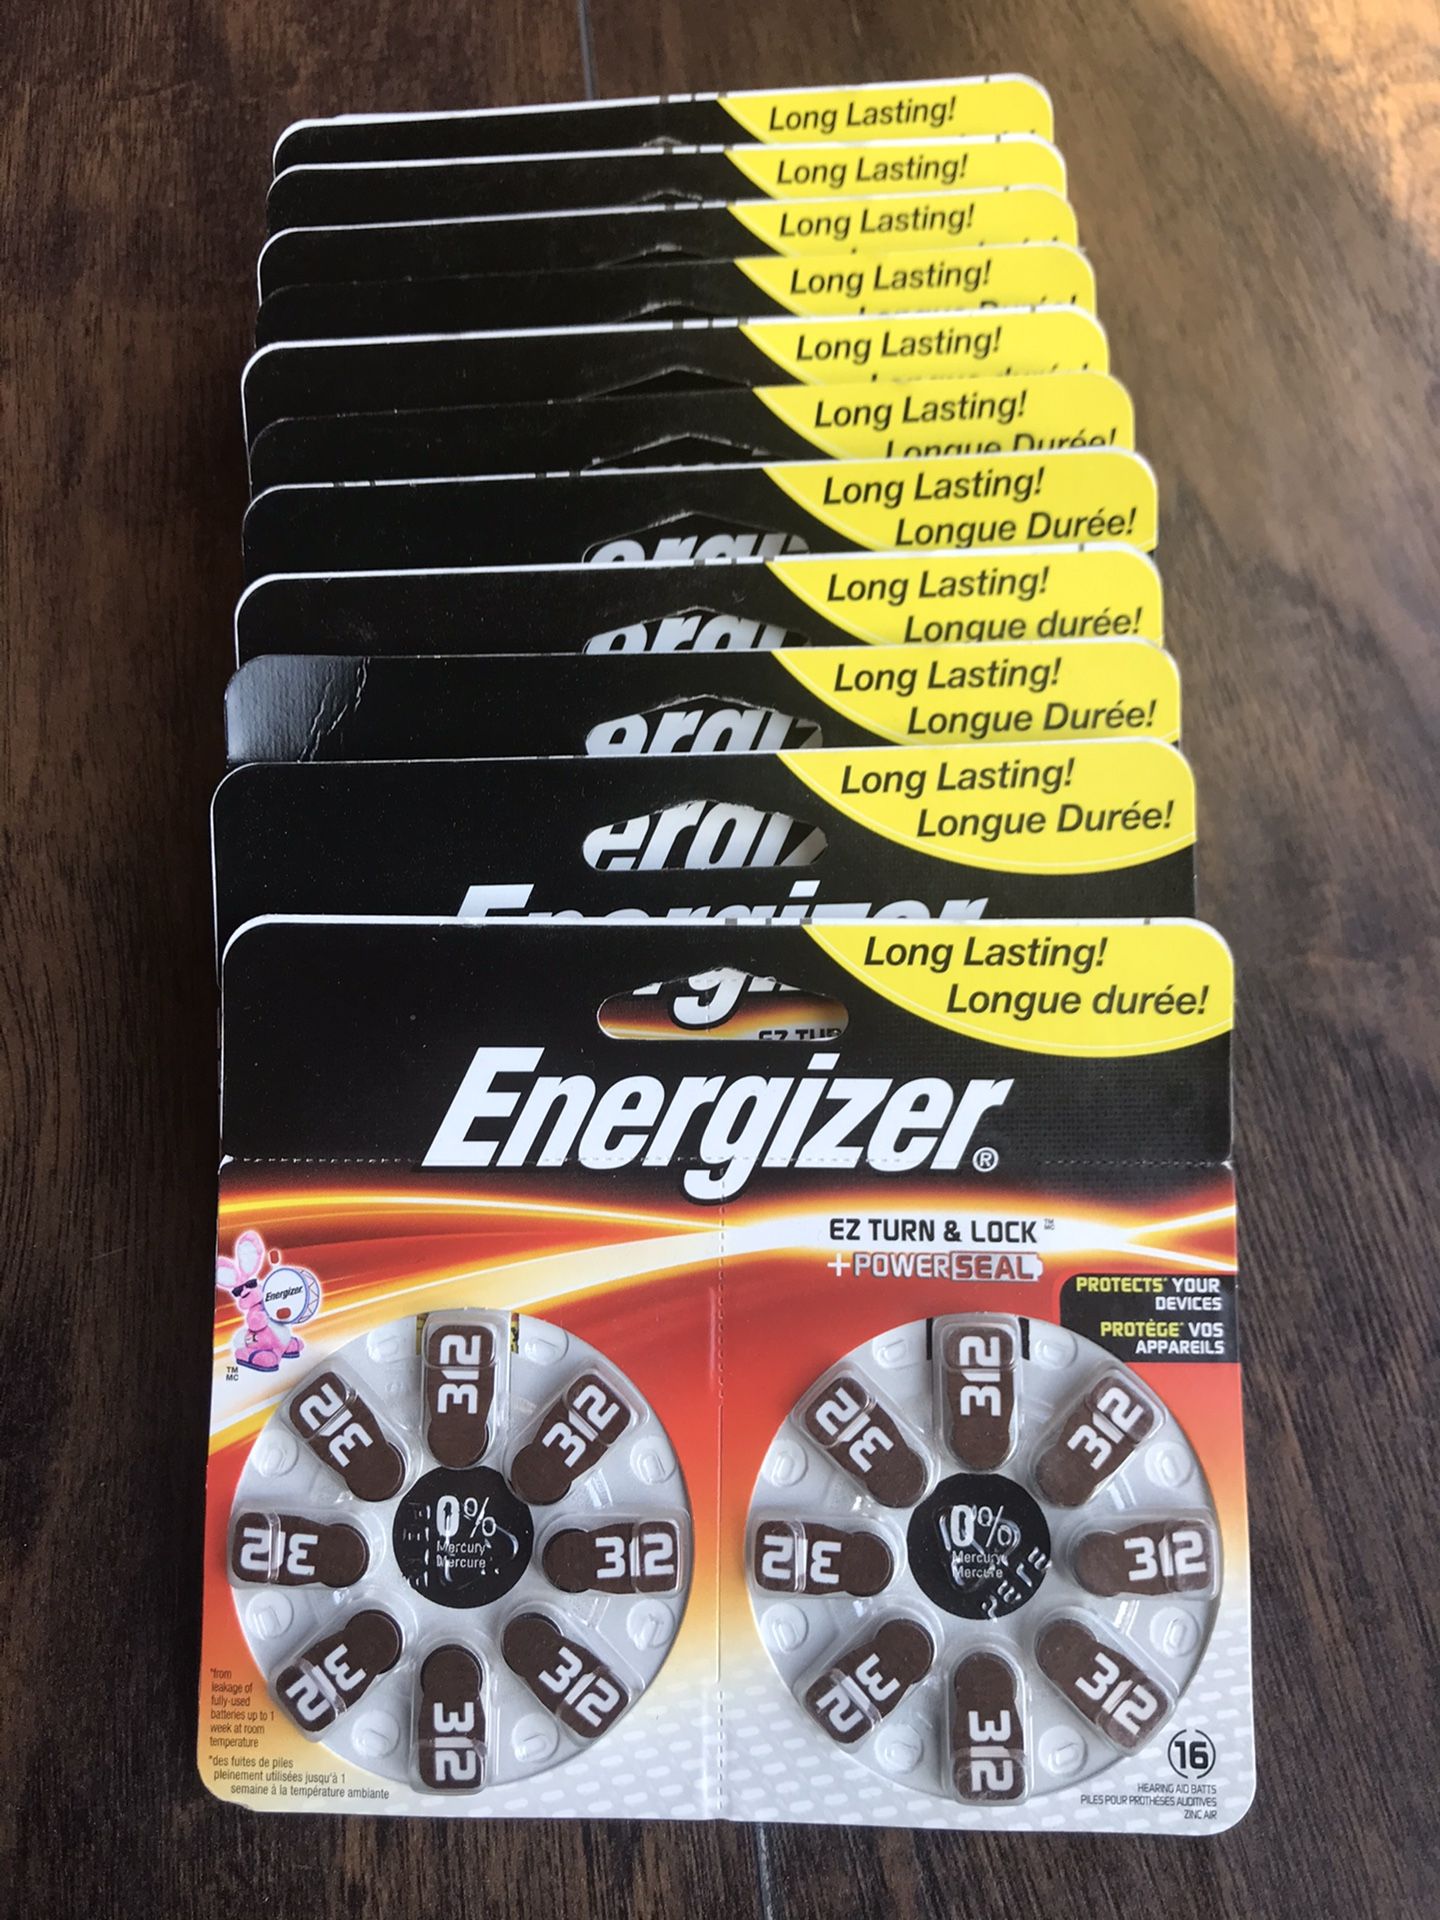 Energizer 312 EZ Turn & Lock Hearing Aid Batteries 16 Count. Lot of 13. Brand New Never Used.